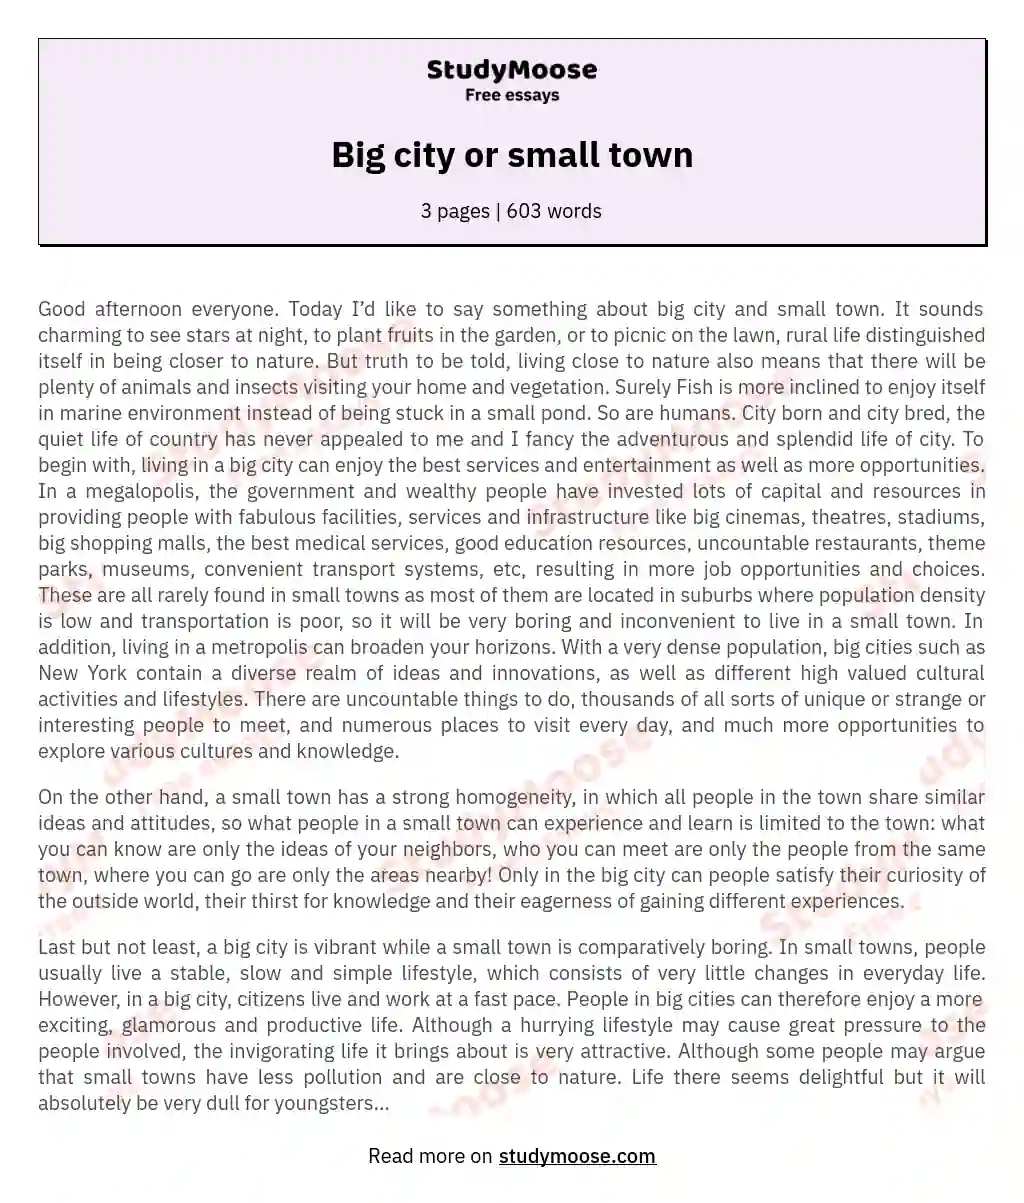 Big city or small town